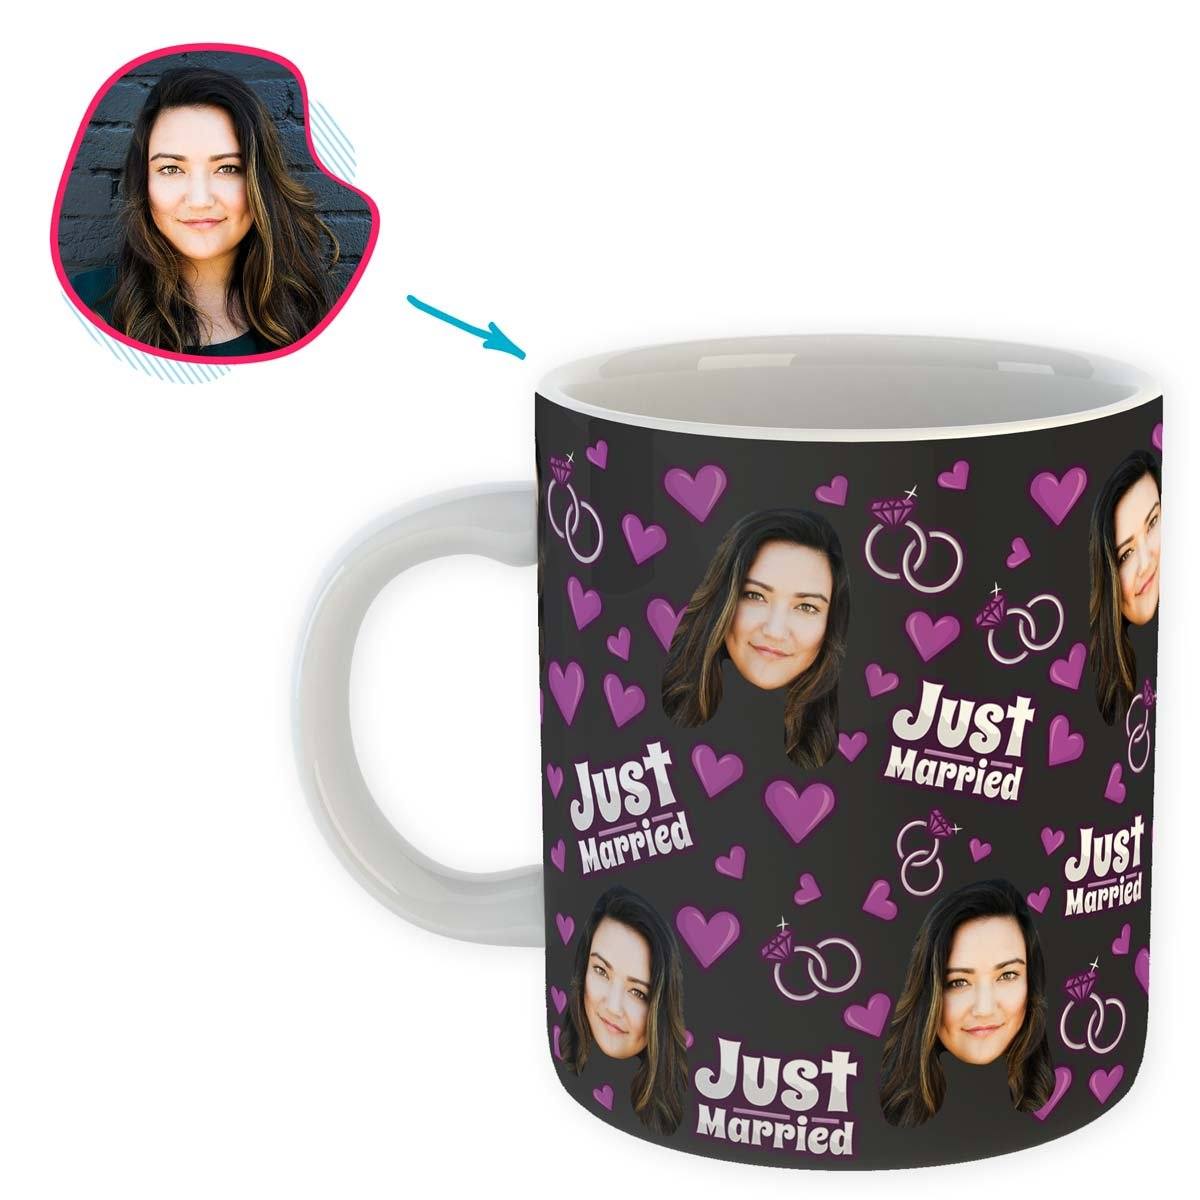 dark Just Married mug personalized with photo of face printed on it